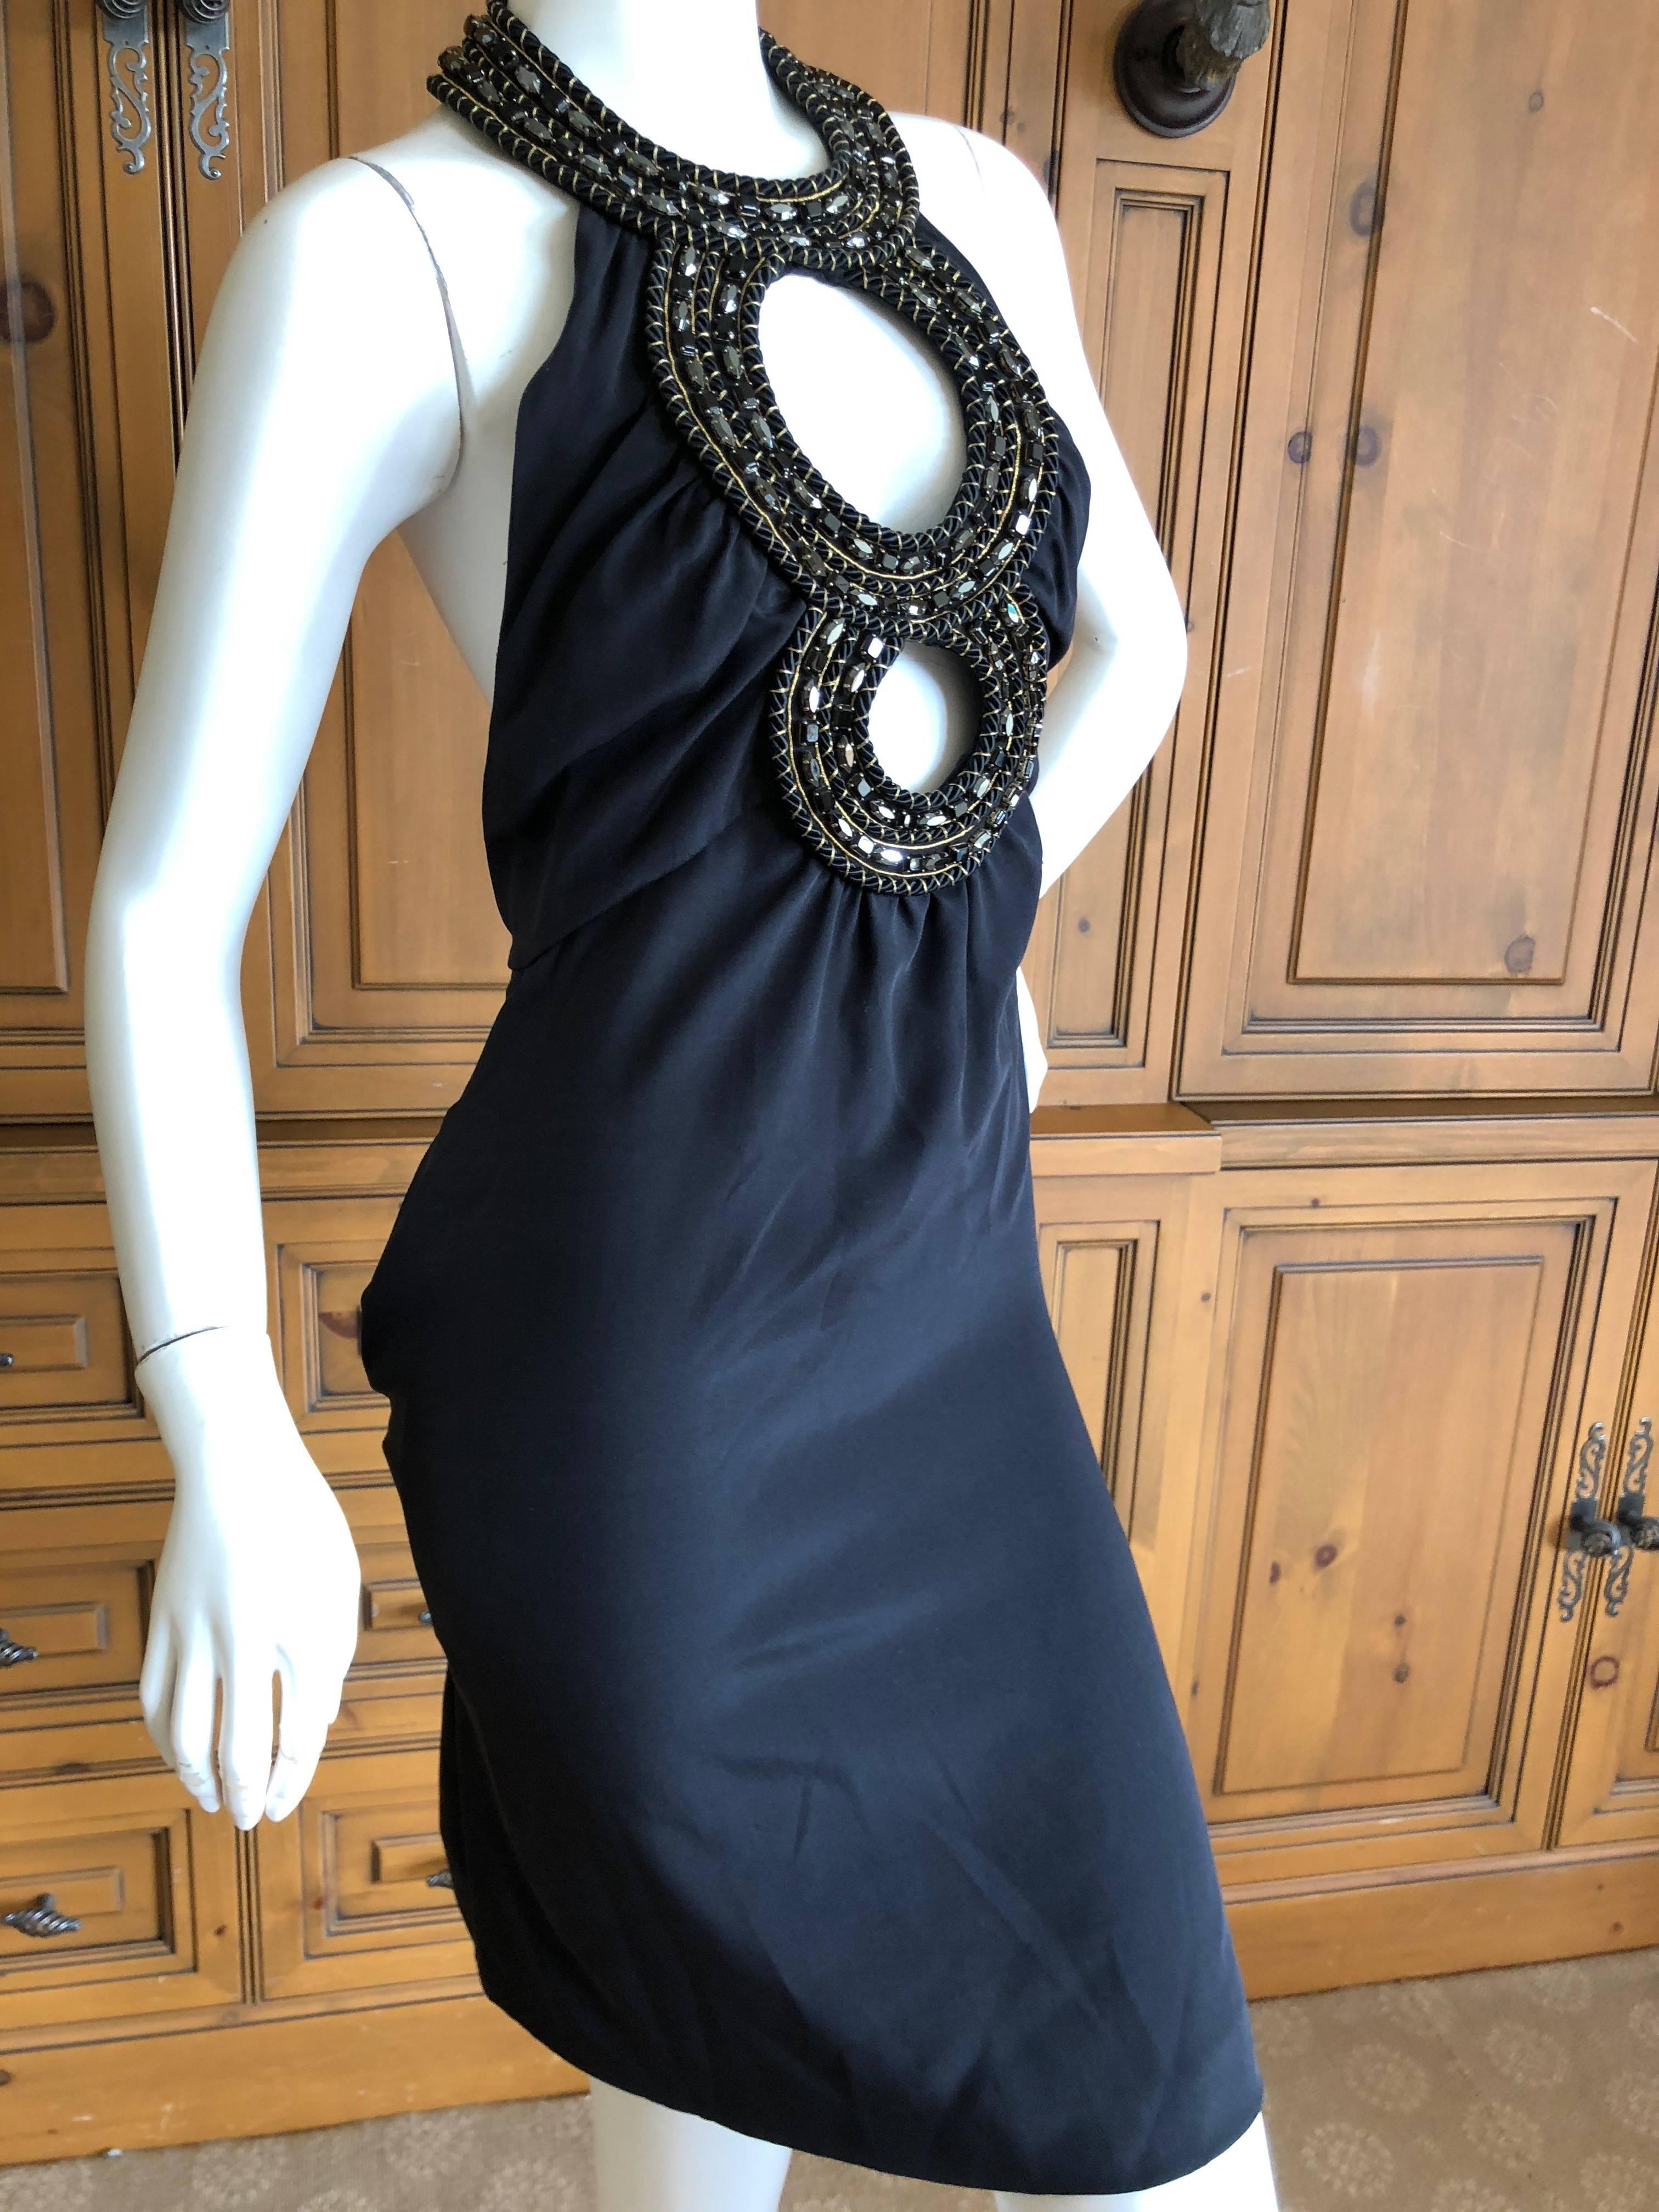 Azzaro Iconic Keyhole Backless Dress with Crystal and Cording Details For Sale 1